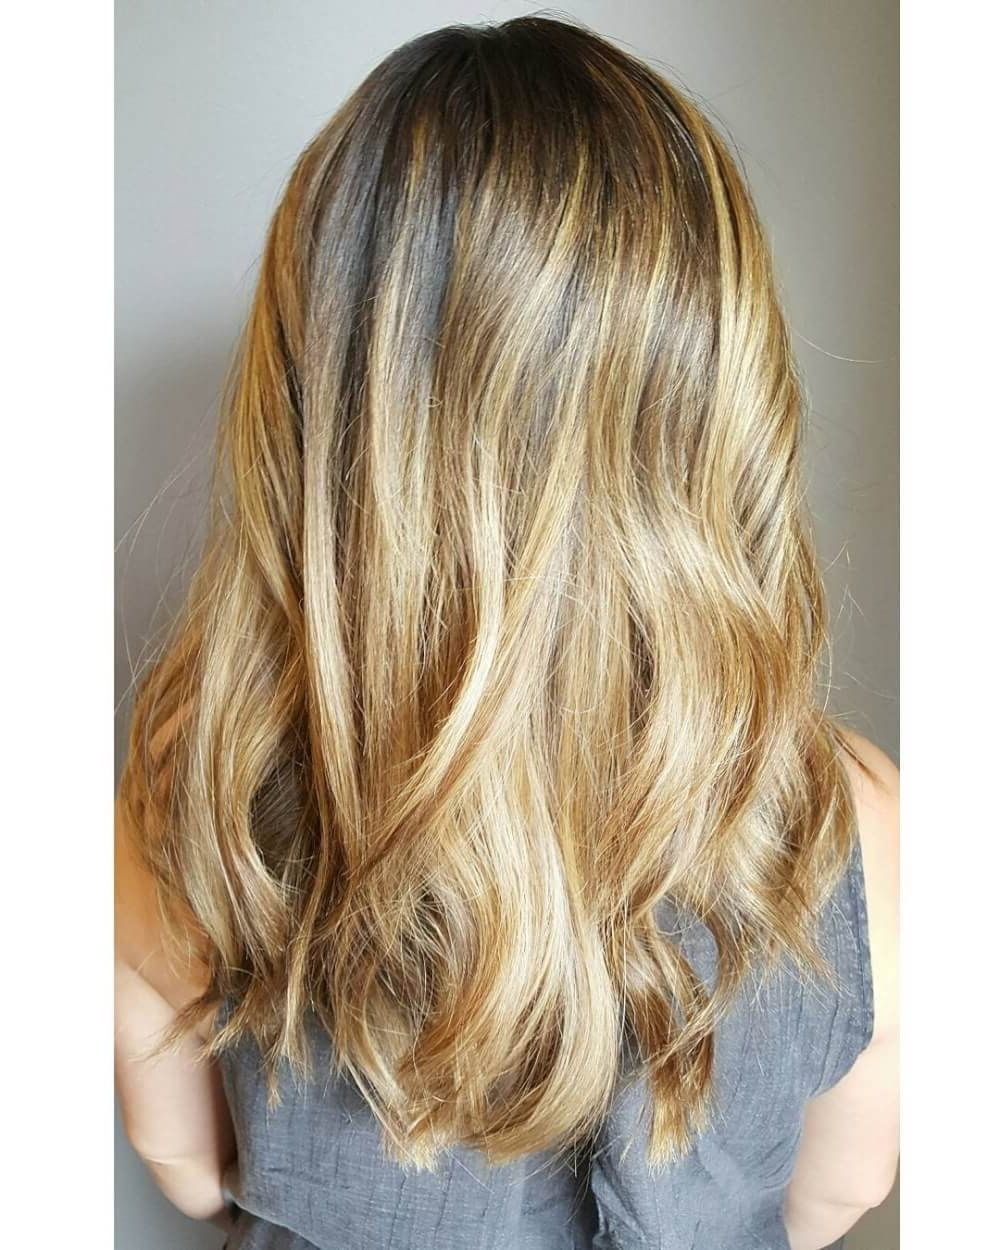 38 Top Blonde Highlights Of 2018 – Platinum, Ash, Dirty, Honey & Dark Intended For Most Recently Released Dirty Blonde Hairstyles With Subtle Highlights (Gallery 3 of 20)